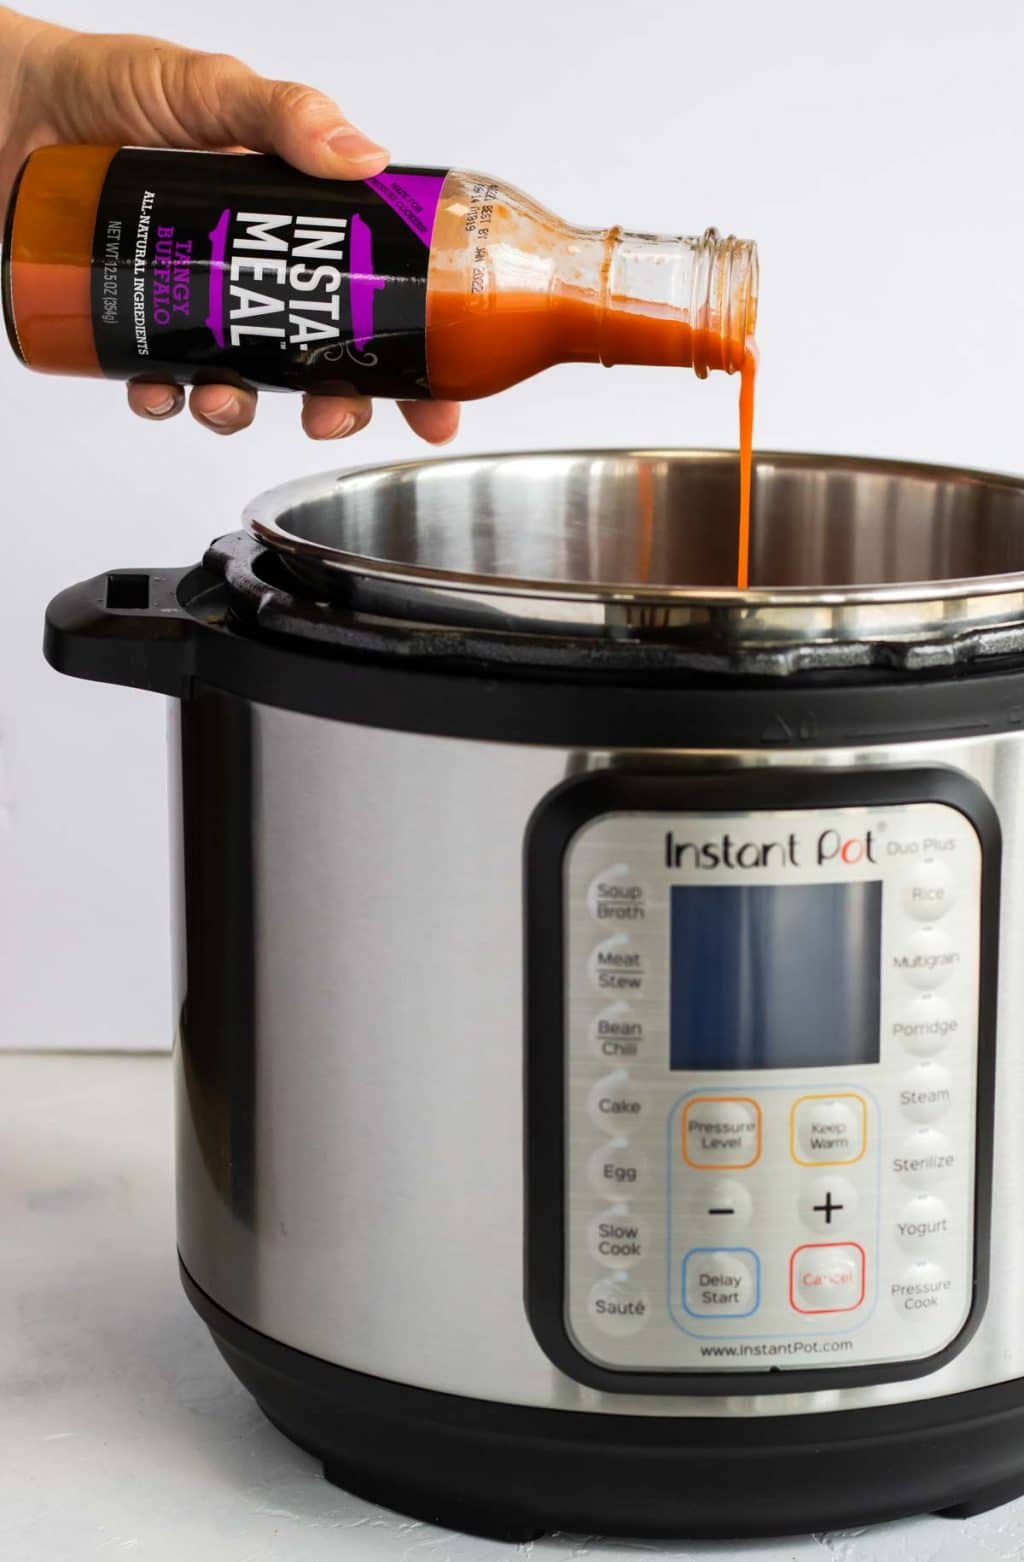 Pouring Tangy buffalo sauce into the instant pot